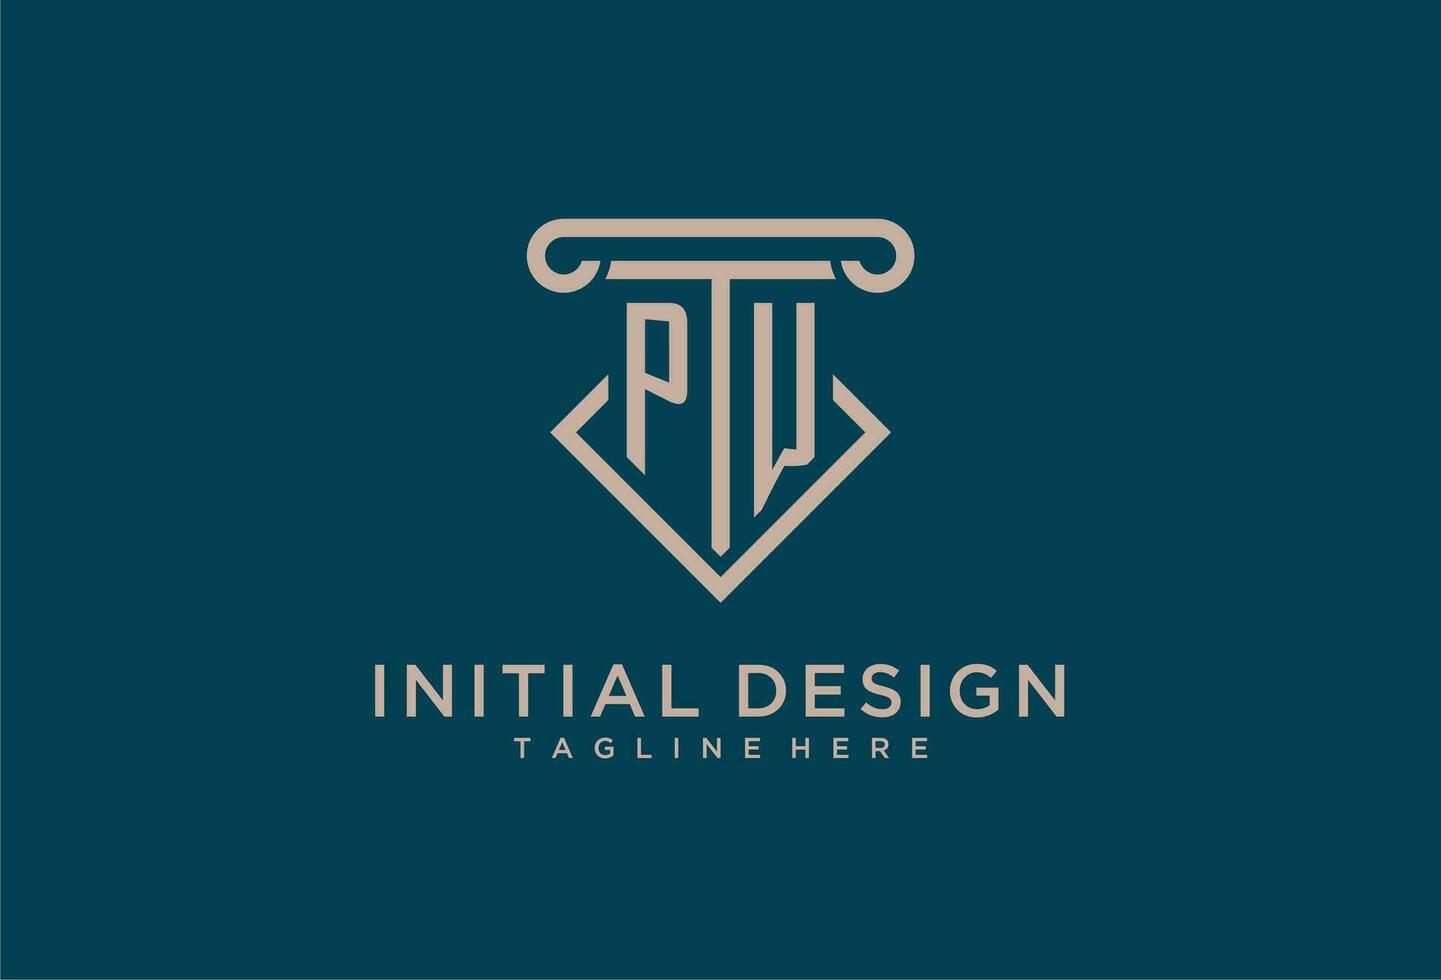 PW initial with pillar icon design, clean and modern attorney, legal firm logo vector